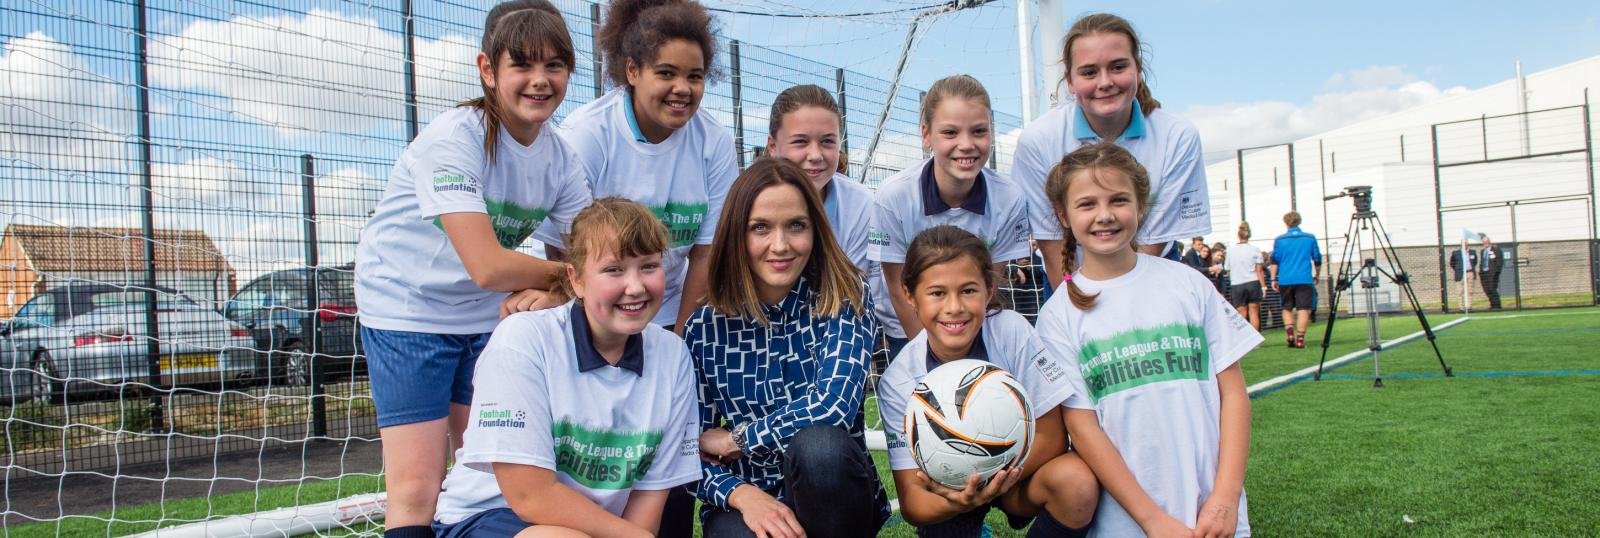 Football Foundation Monthly: Olympic hero Pendleton unveils £2.5m sports hub at her former school